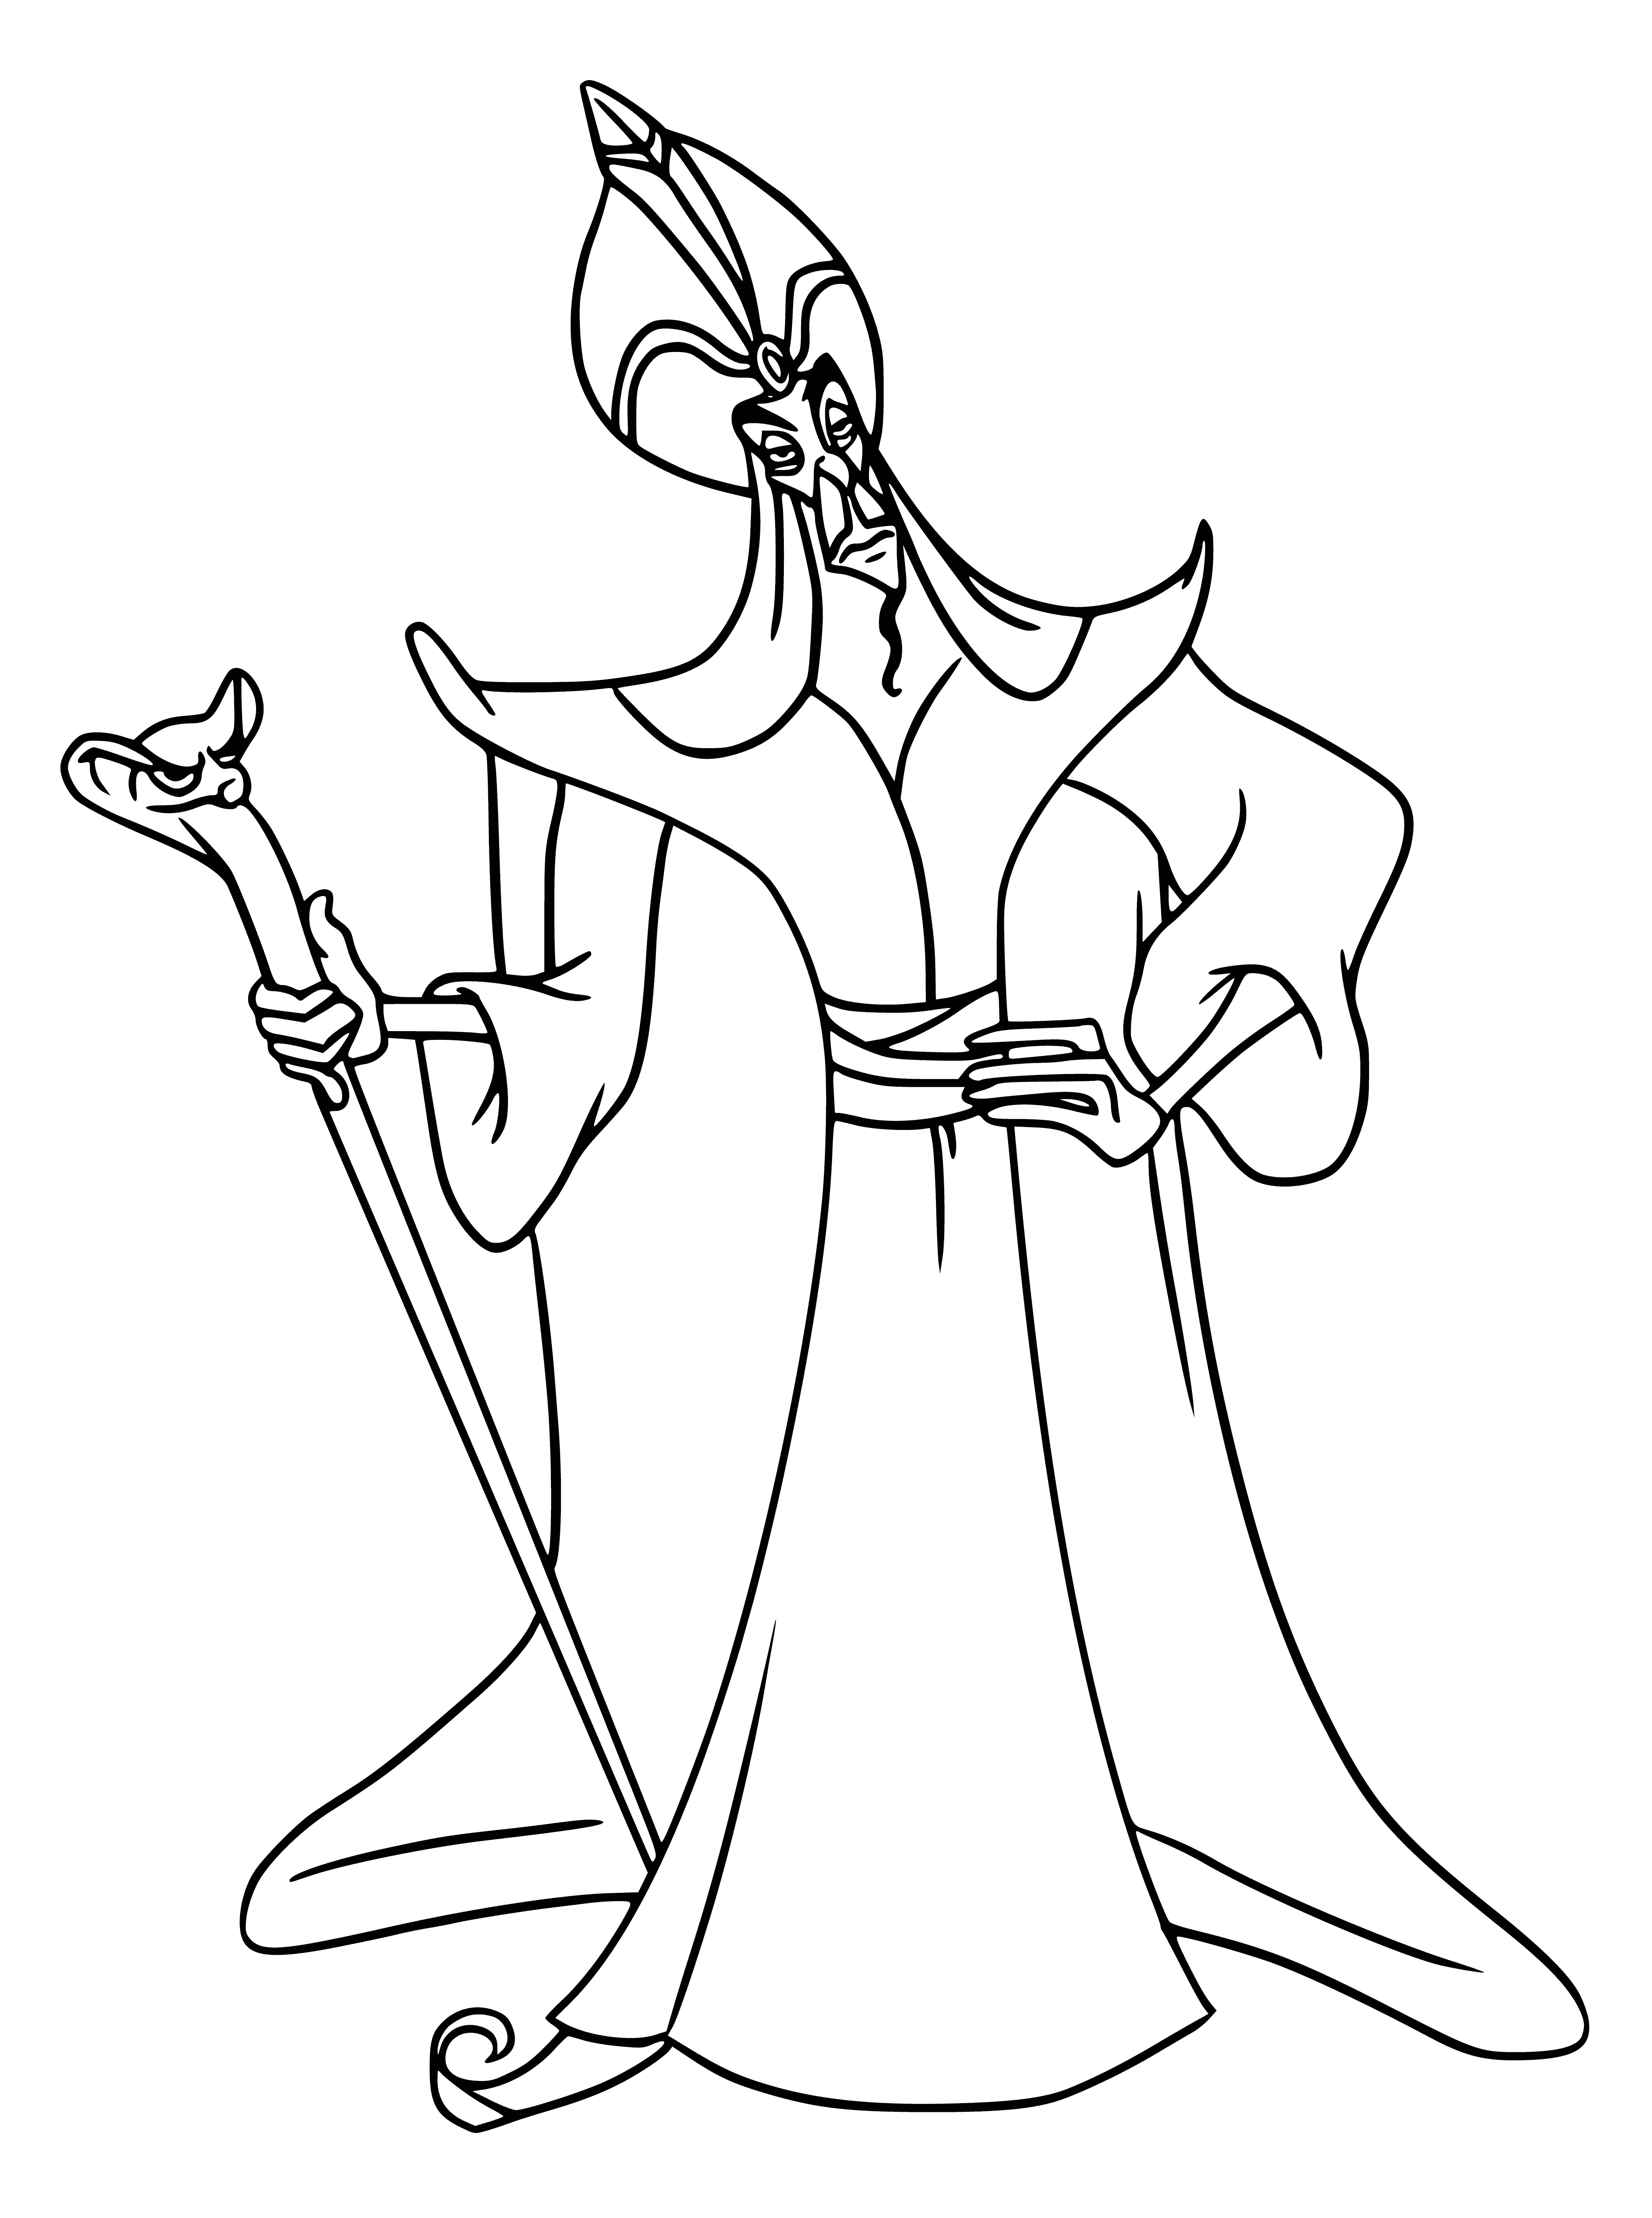 coloring page: Jafar is a power-hungry villain intent on ruling Agrabah. He uses his snake staff to control his pet Iago. He will do anything to get what he wants.